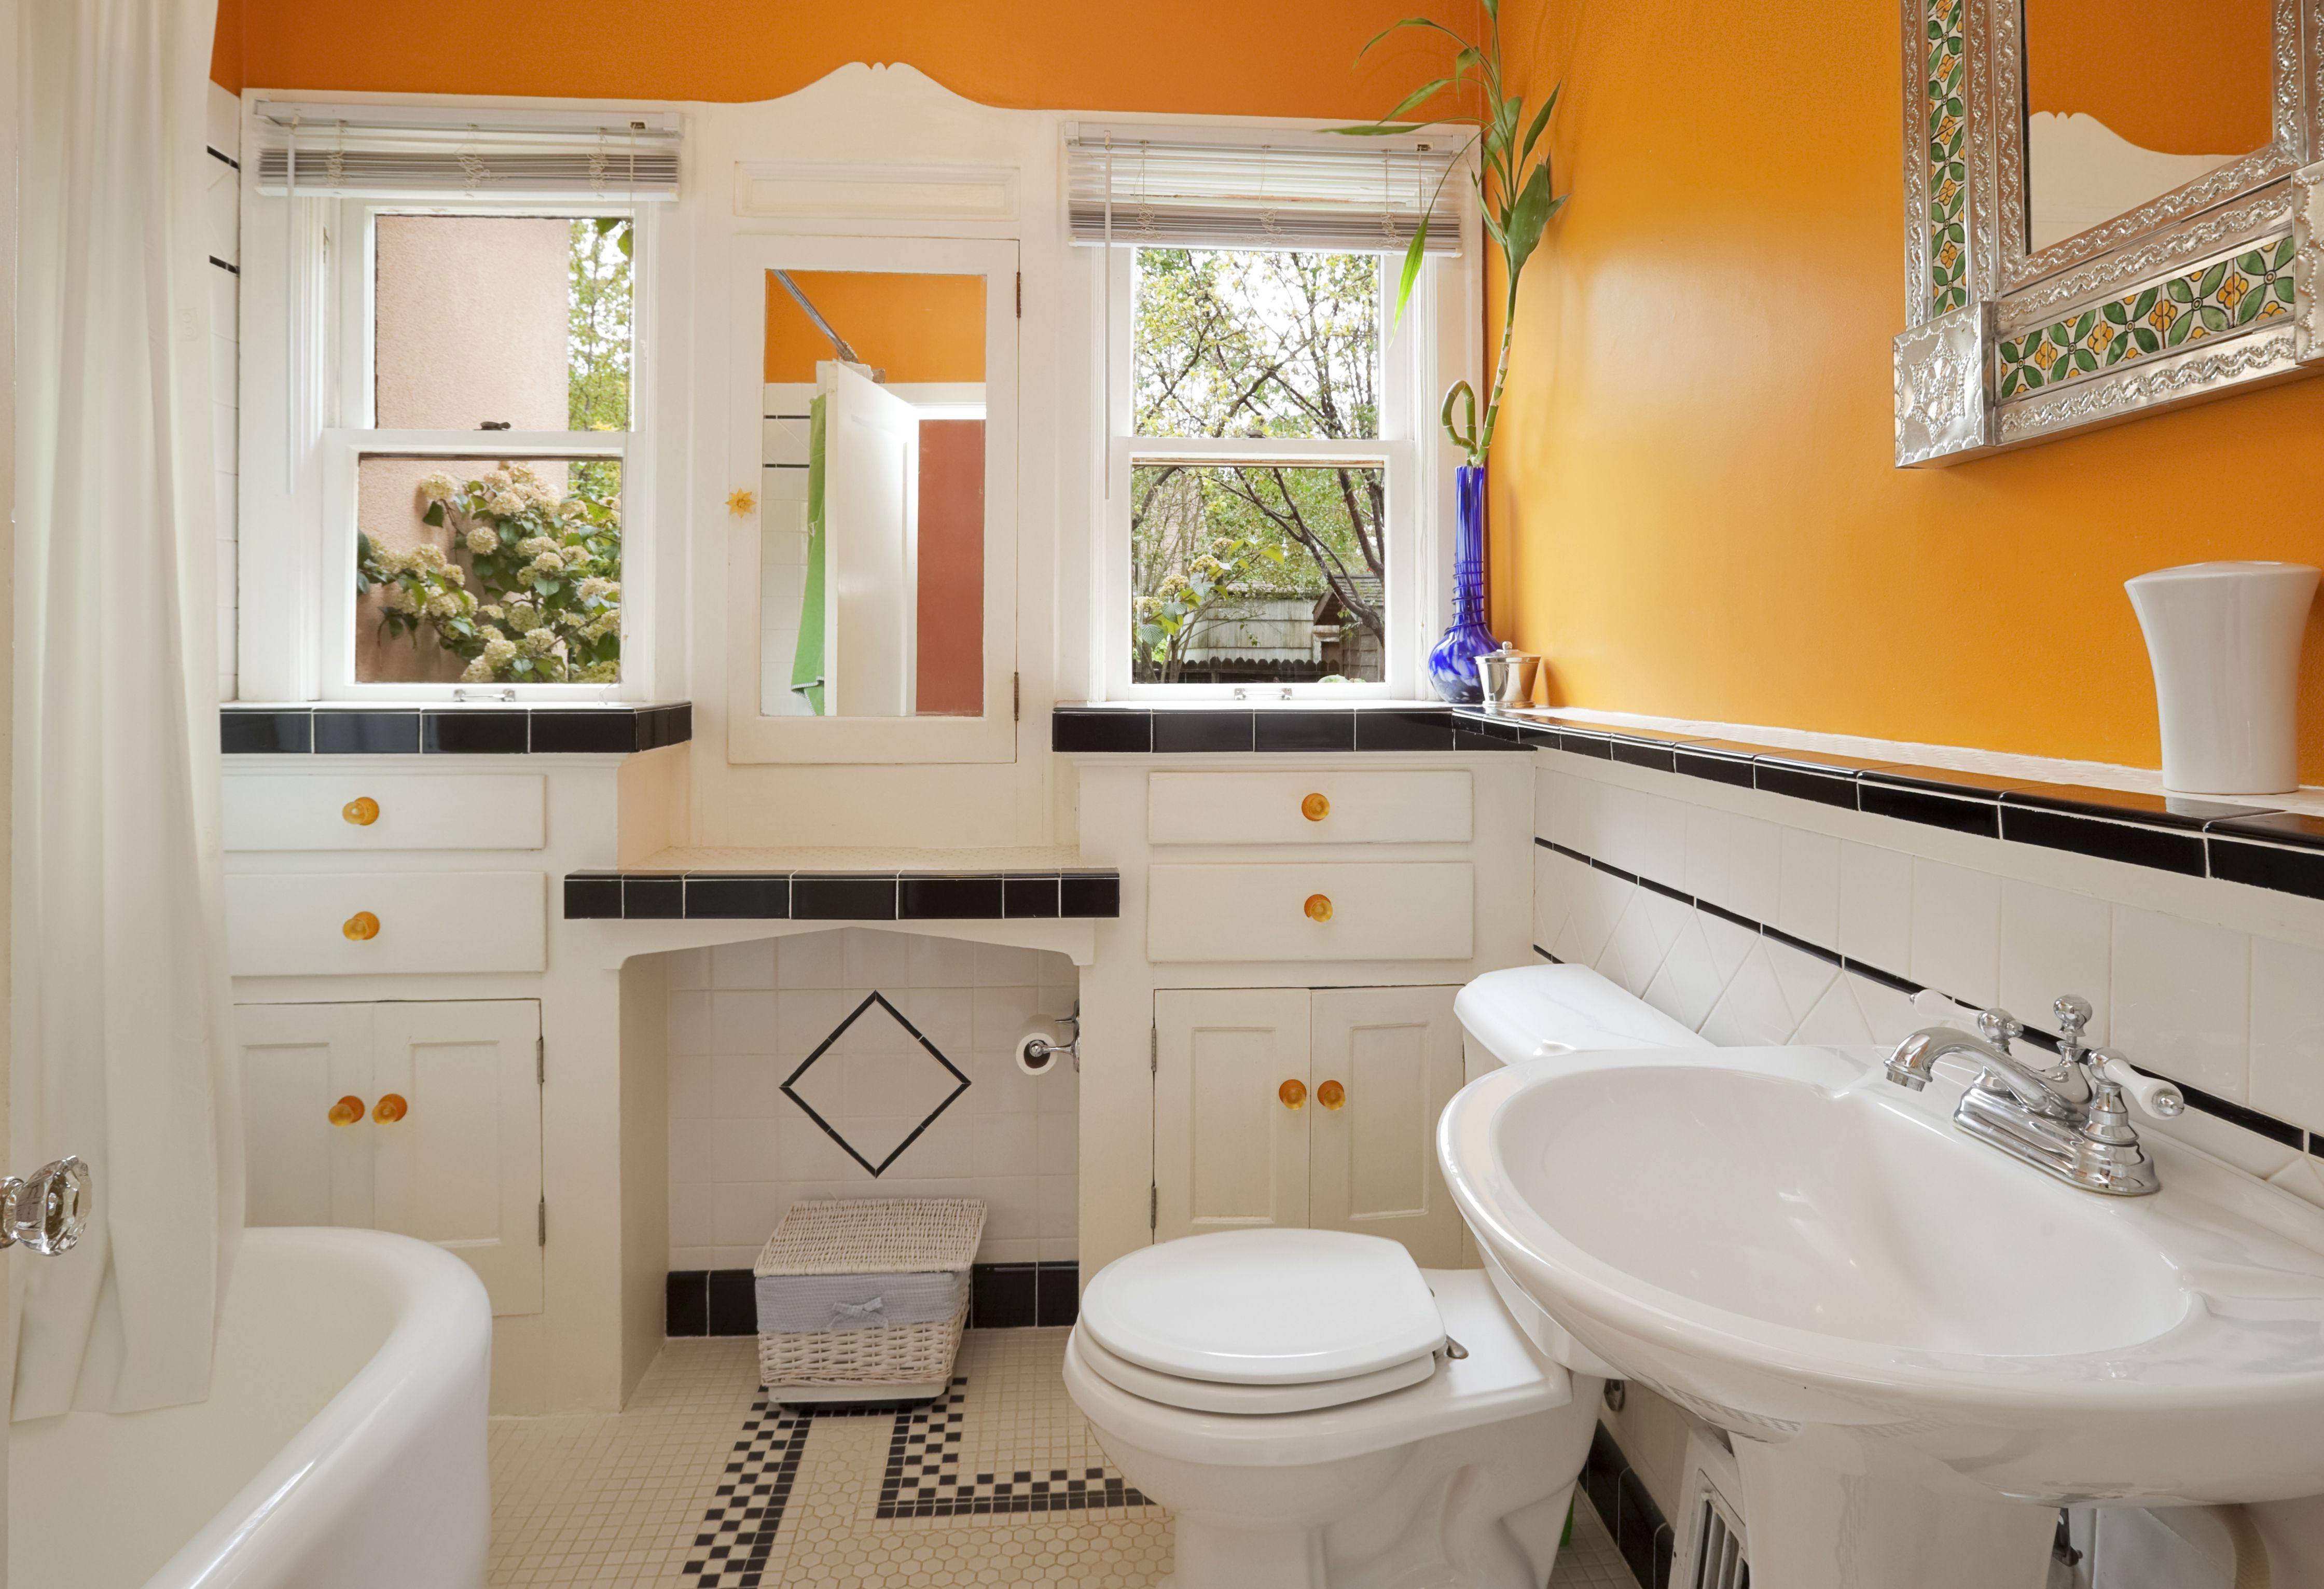 Bathroom Paint Colors to Inspire Your Design